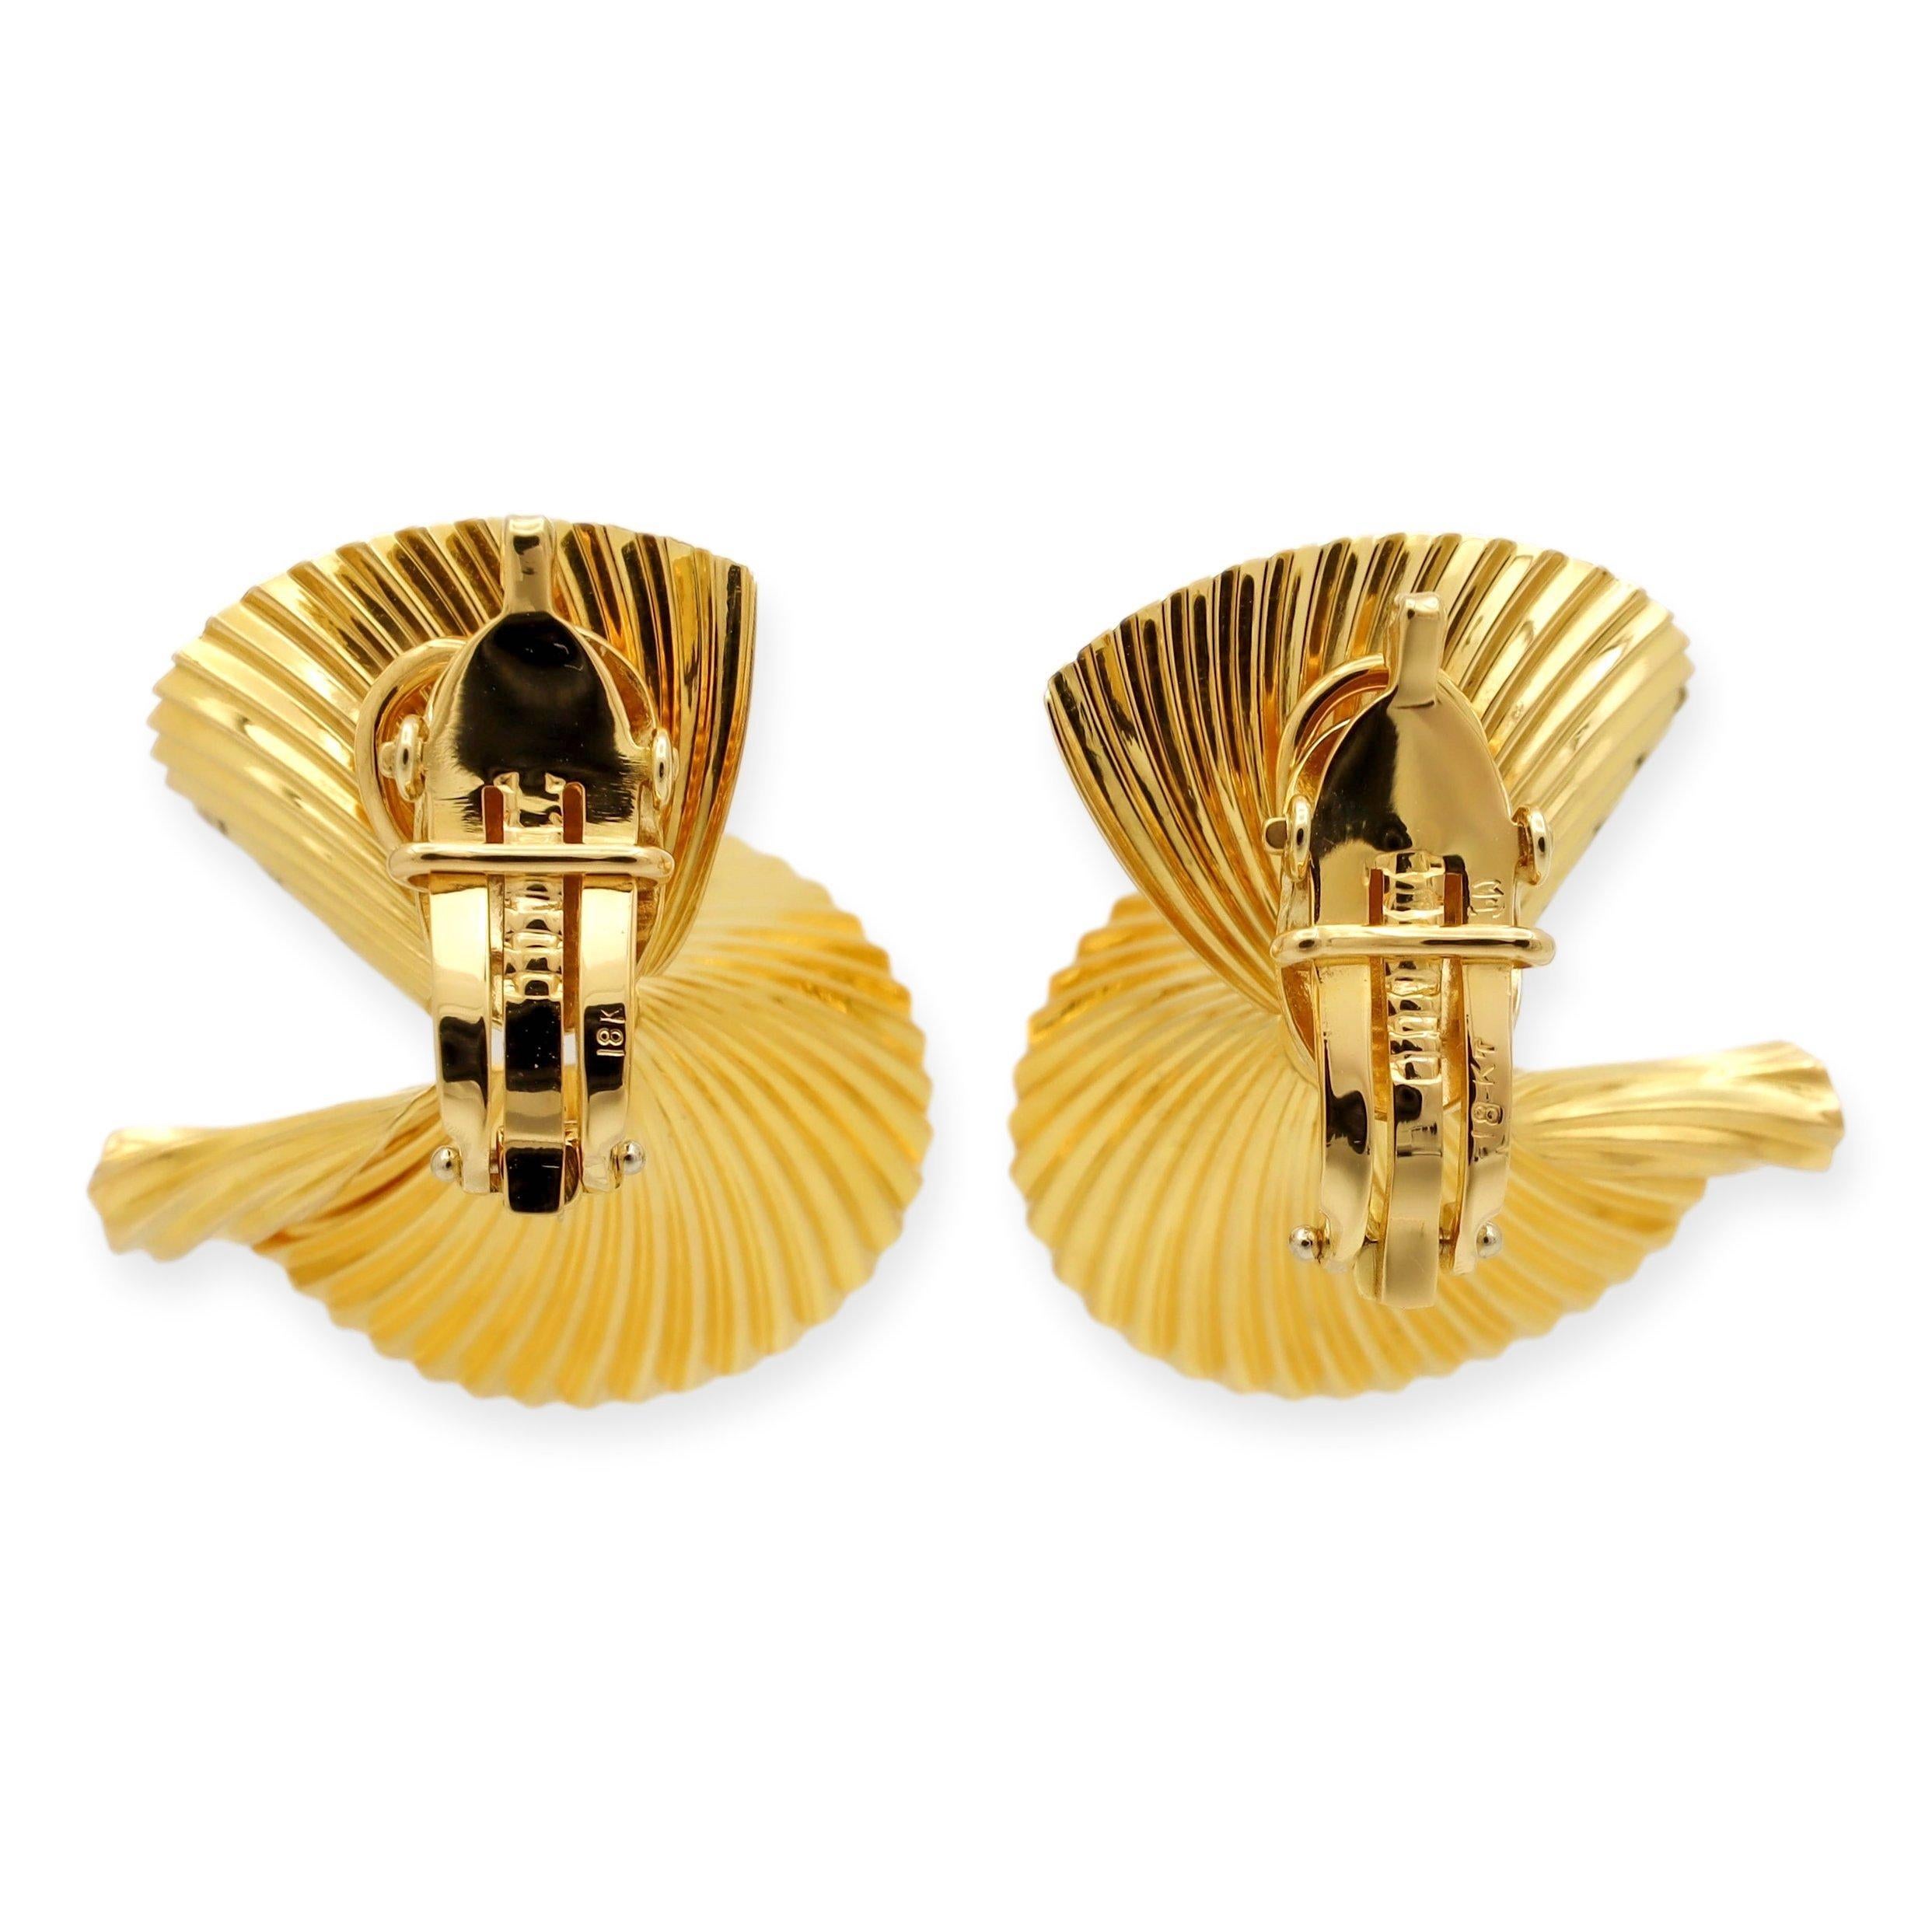 Retro Vintage Earrings, meticulously crafted in 18k yellow gold with large omega clip backs, showcasing a captivating swirl fan design reminiscent of Tiffany & Co.'s iconic 1950's style. Hallmarked with metal content, these earrings are a timeless